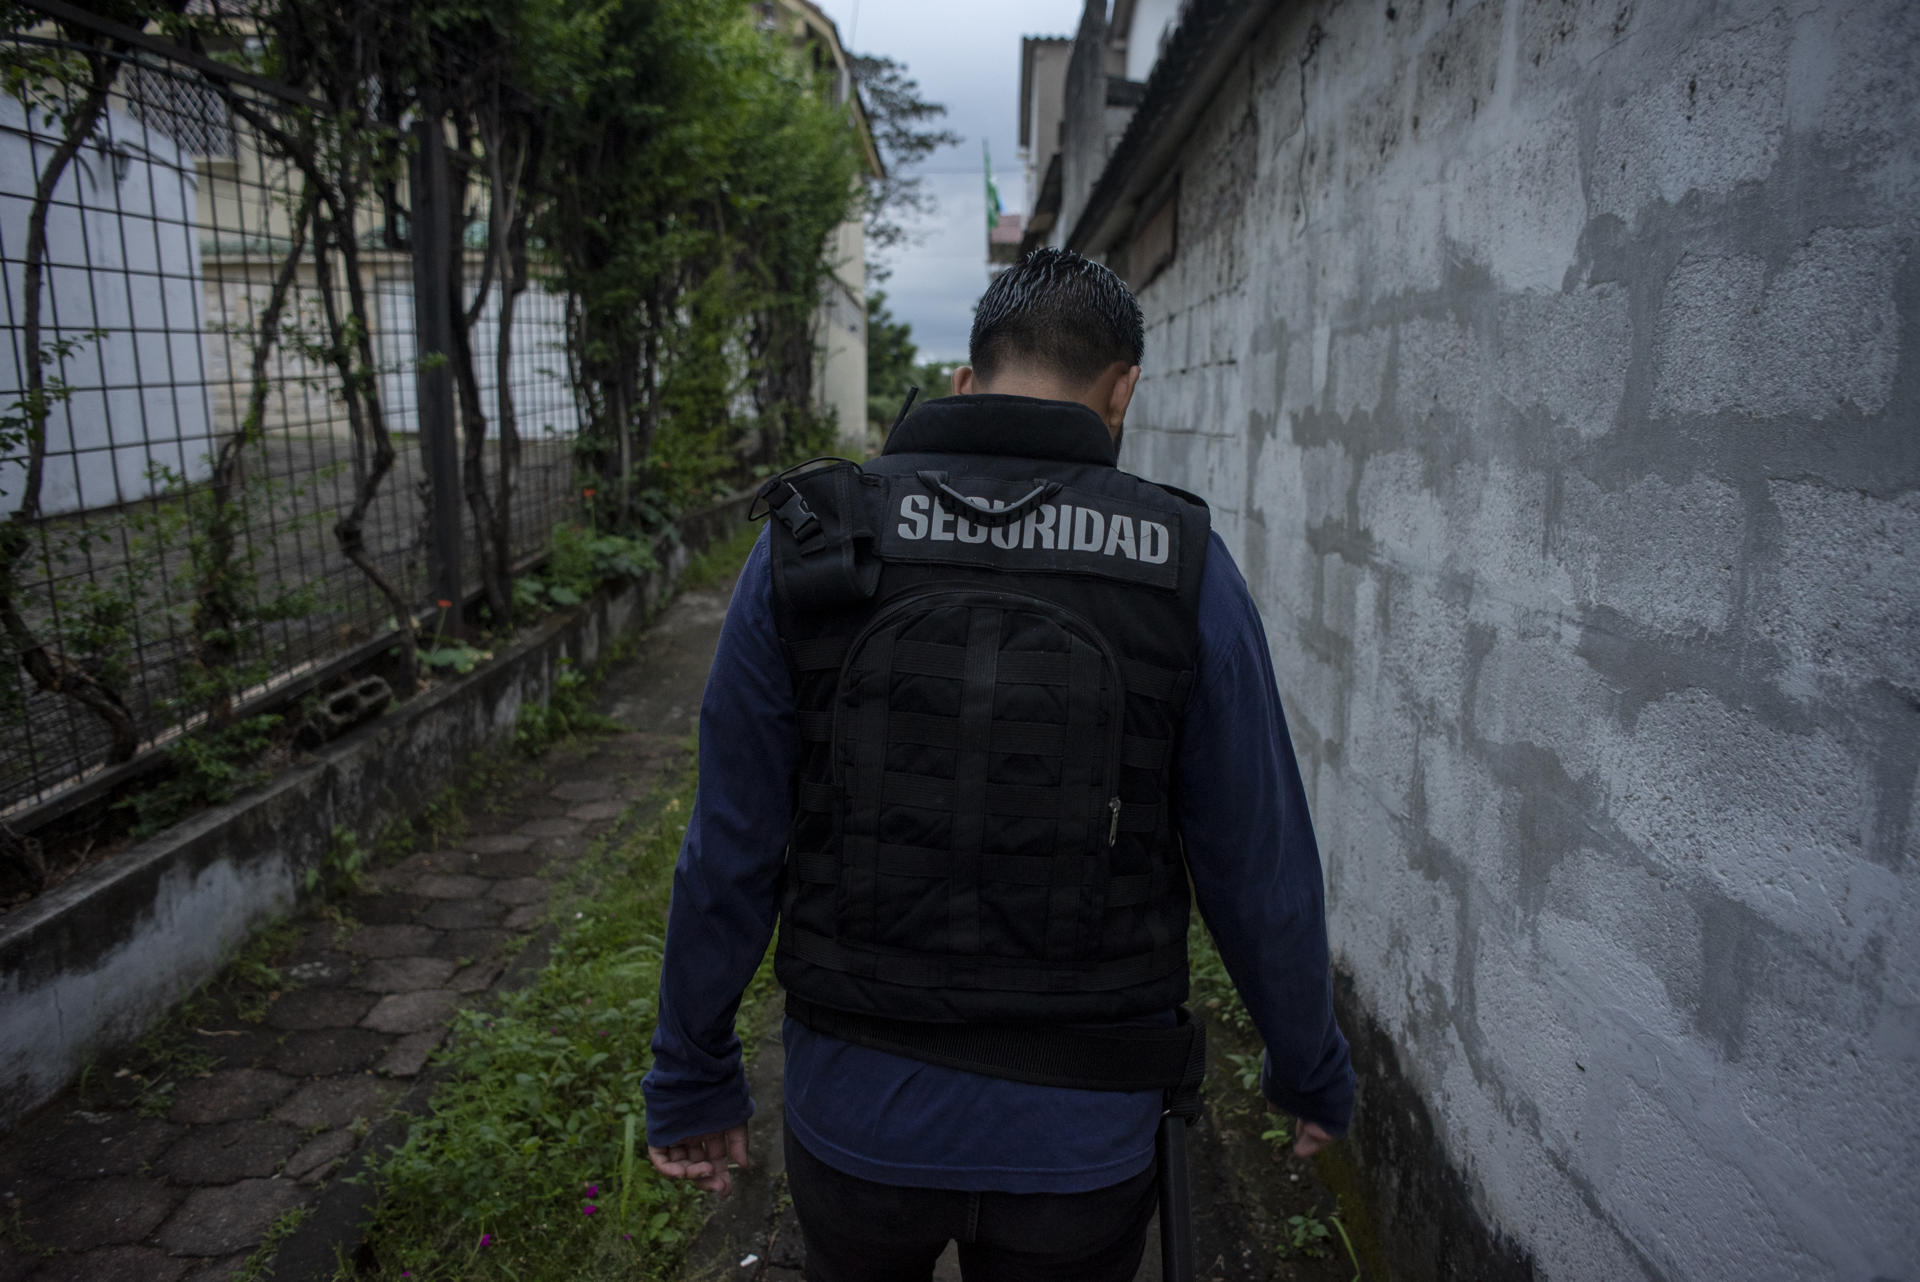 A security guard protects the streets of a neighborhood in Guayaquil, Ecuador. EFE/ Mauricio Torres
